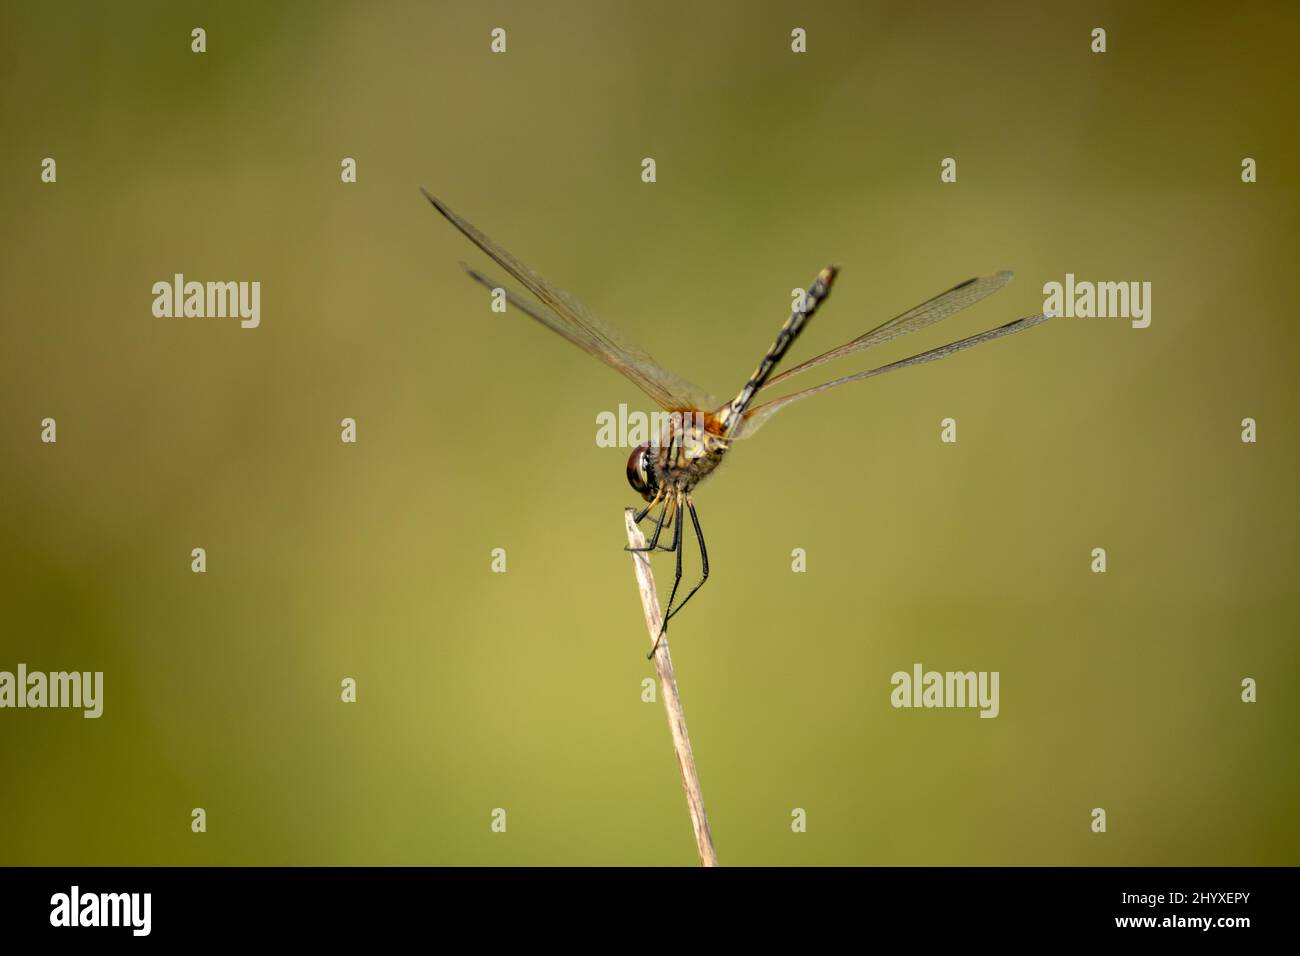 Backside view of resting dragonfly raises its tail up. Stock Photo